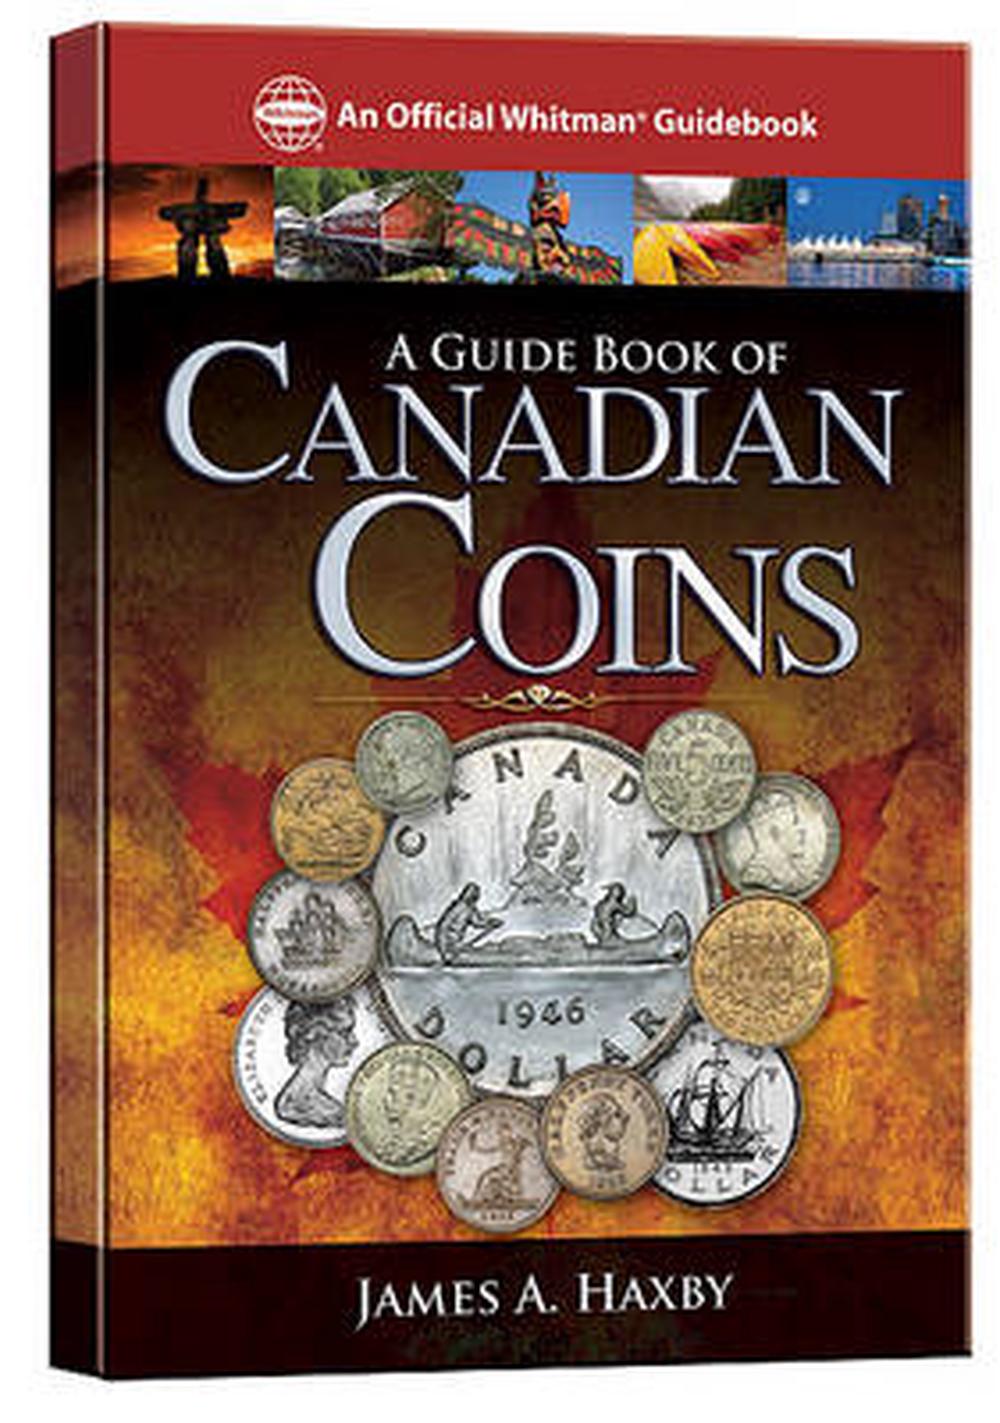 A Guide Book of Canadian Coins by James Haxby (English) Paperback Book